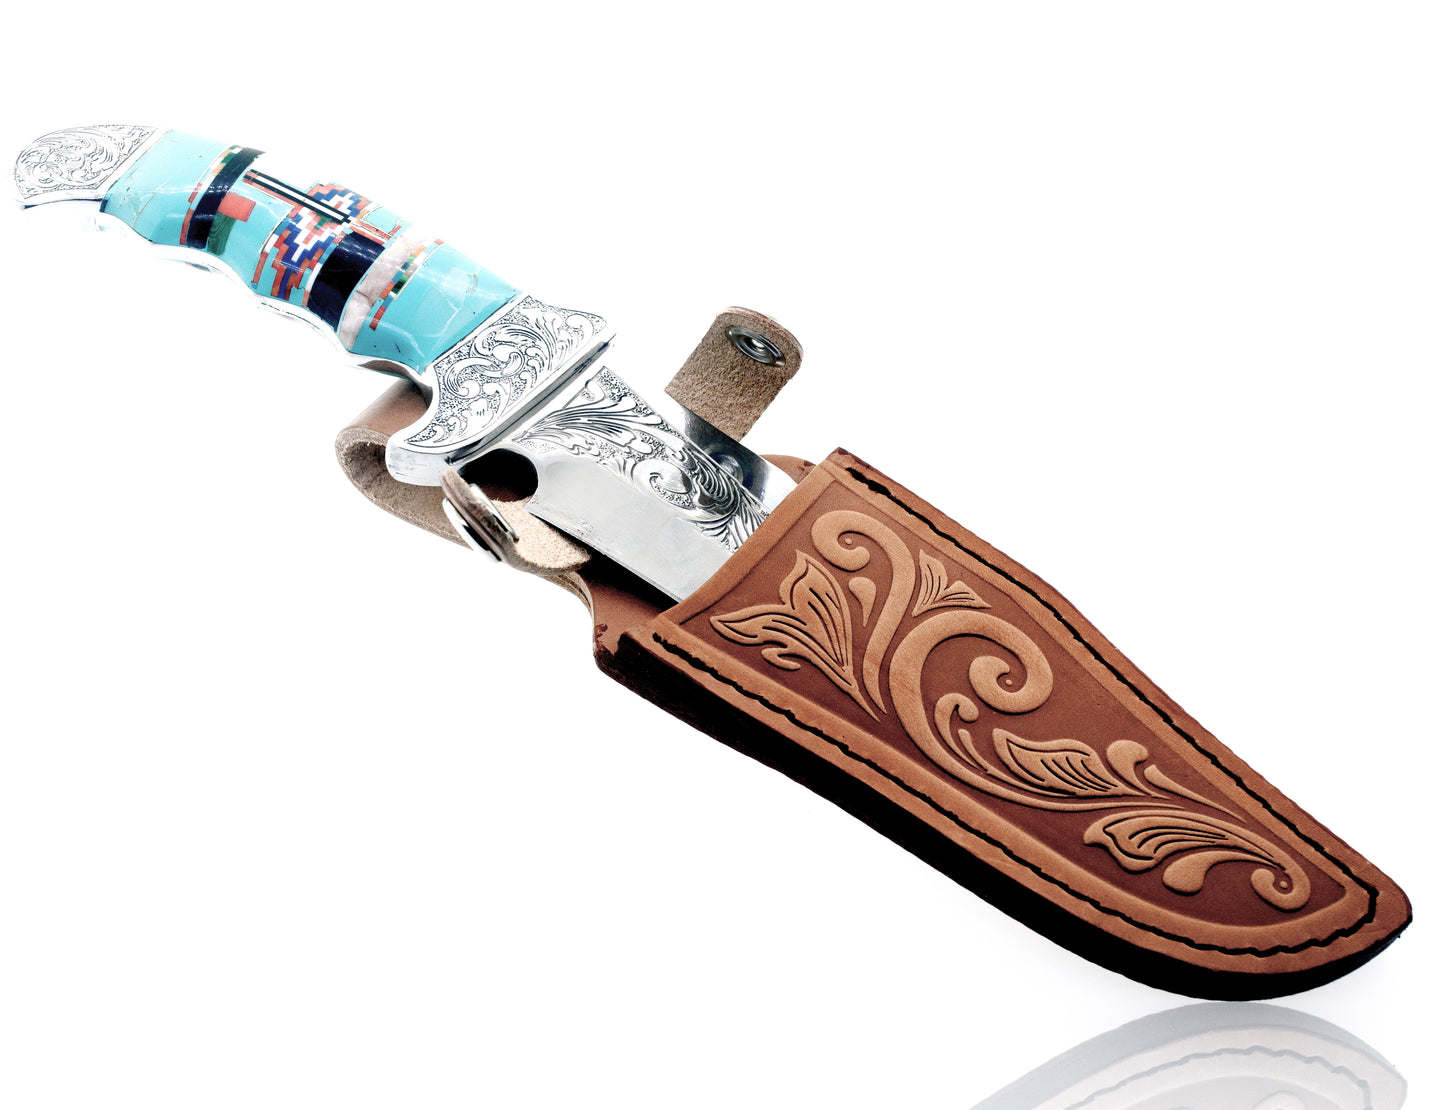 A Stunning Handcrafted Knife with an inlaid stone handle and leather sheath featuring a turquoise stone.